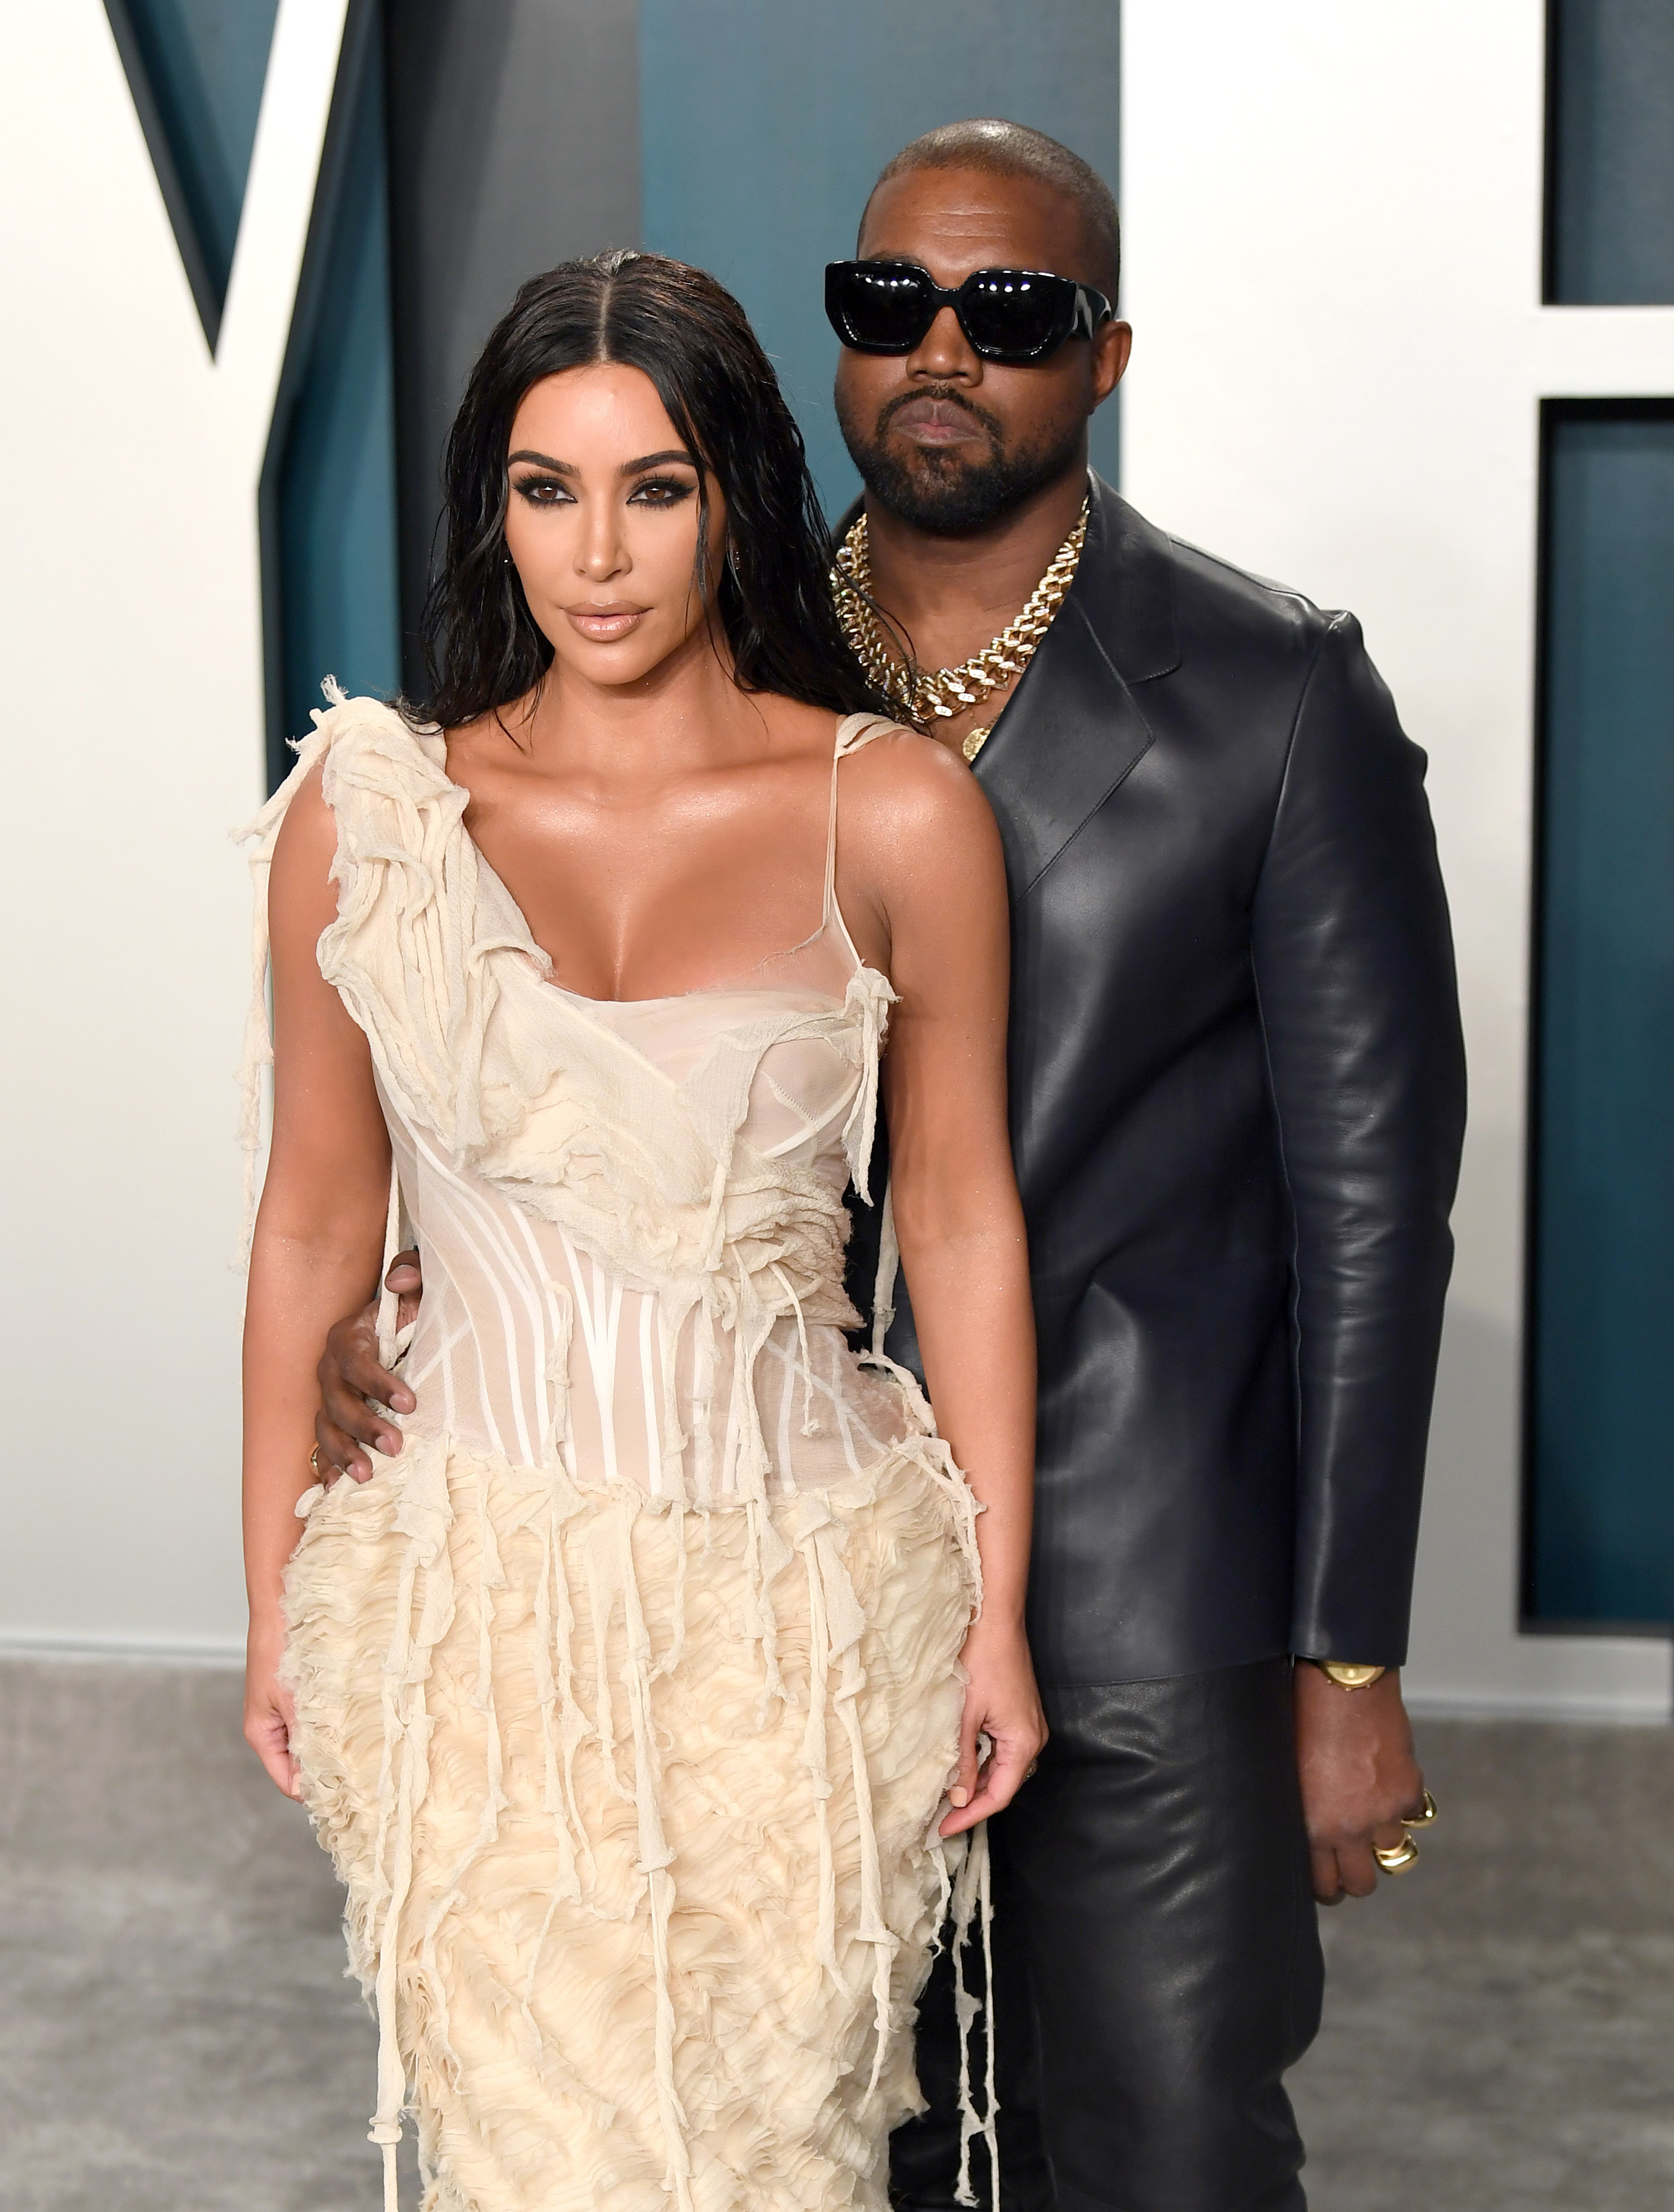 Kim Kardashian in a ruffled dress and Kanye West in a leather jacket posing on the red carpet